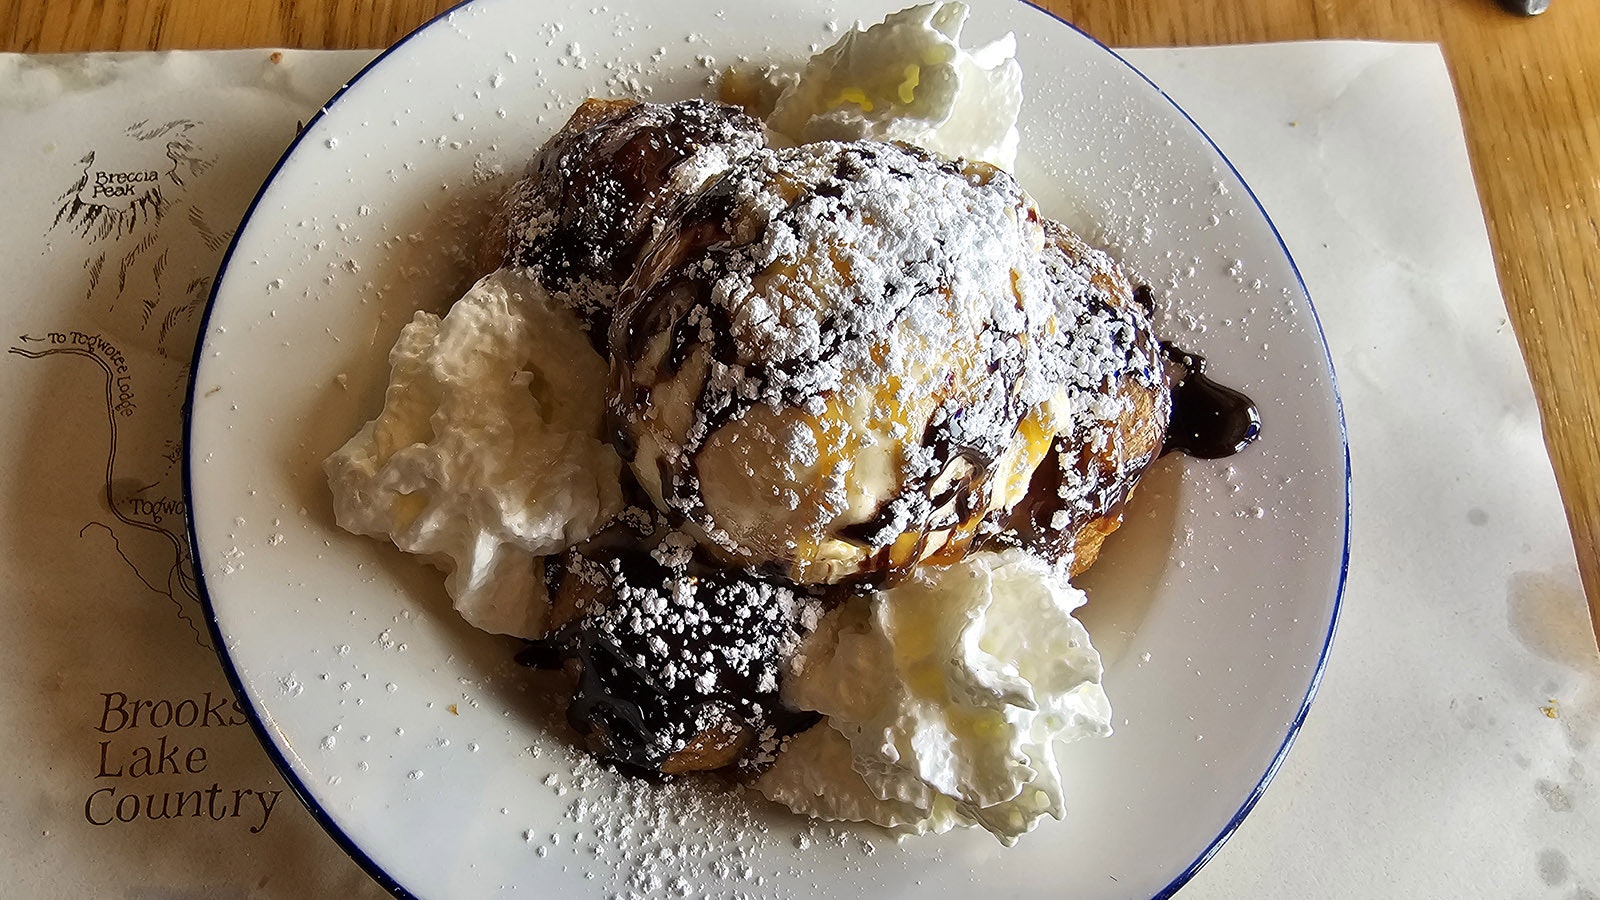 The fried cookie dough ice cream is another must for the winter menu. It's three balls of gooey chocolate chip cookie dough topped with ice cream, chocolate sauce, whipped cream and powdered sugar.